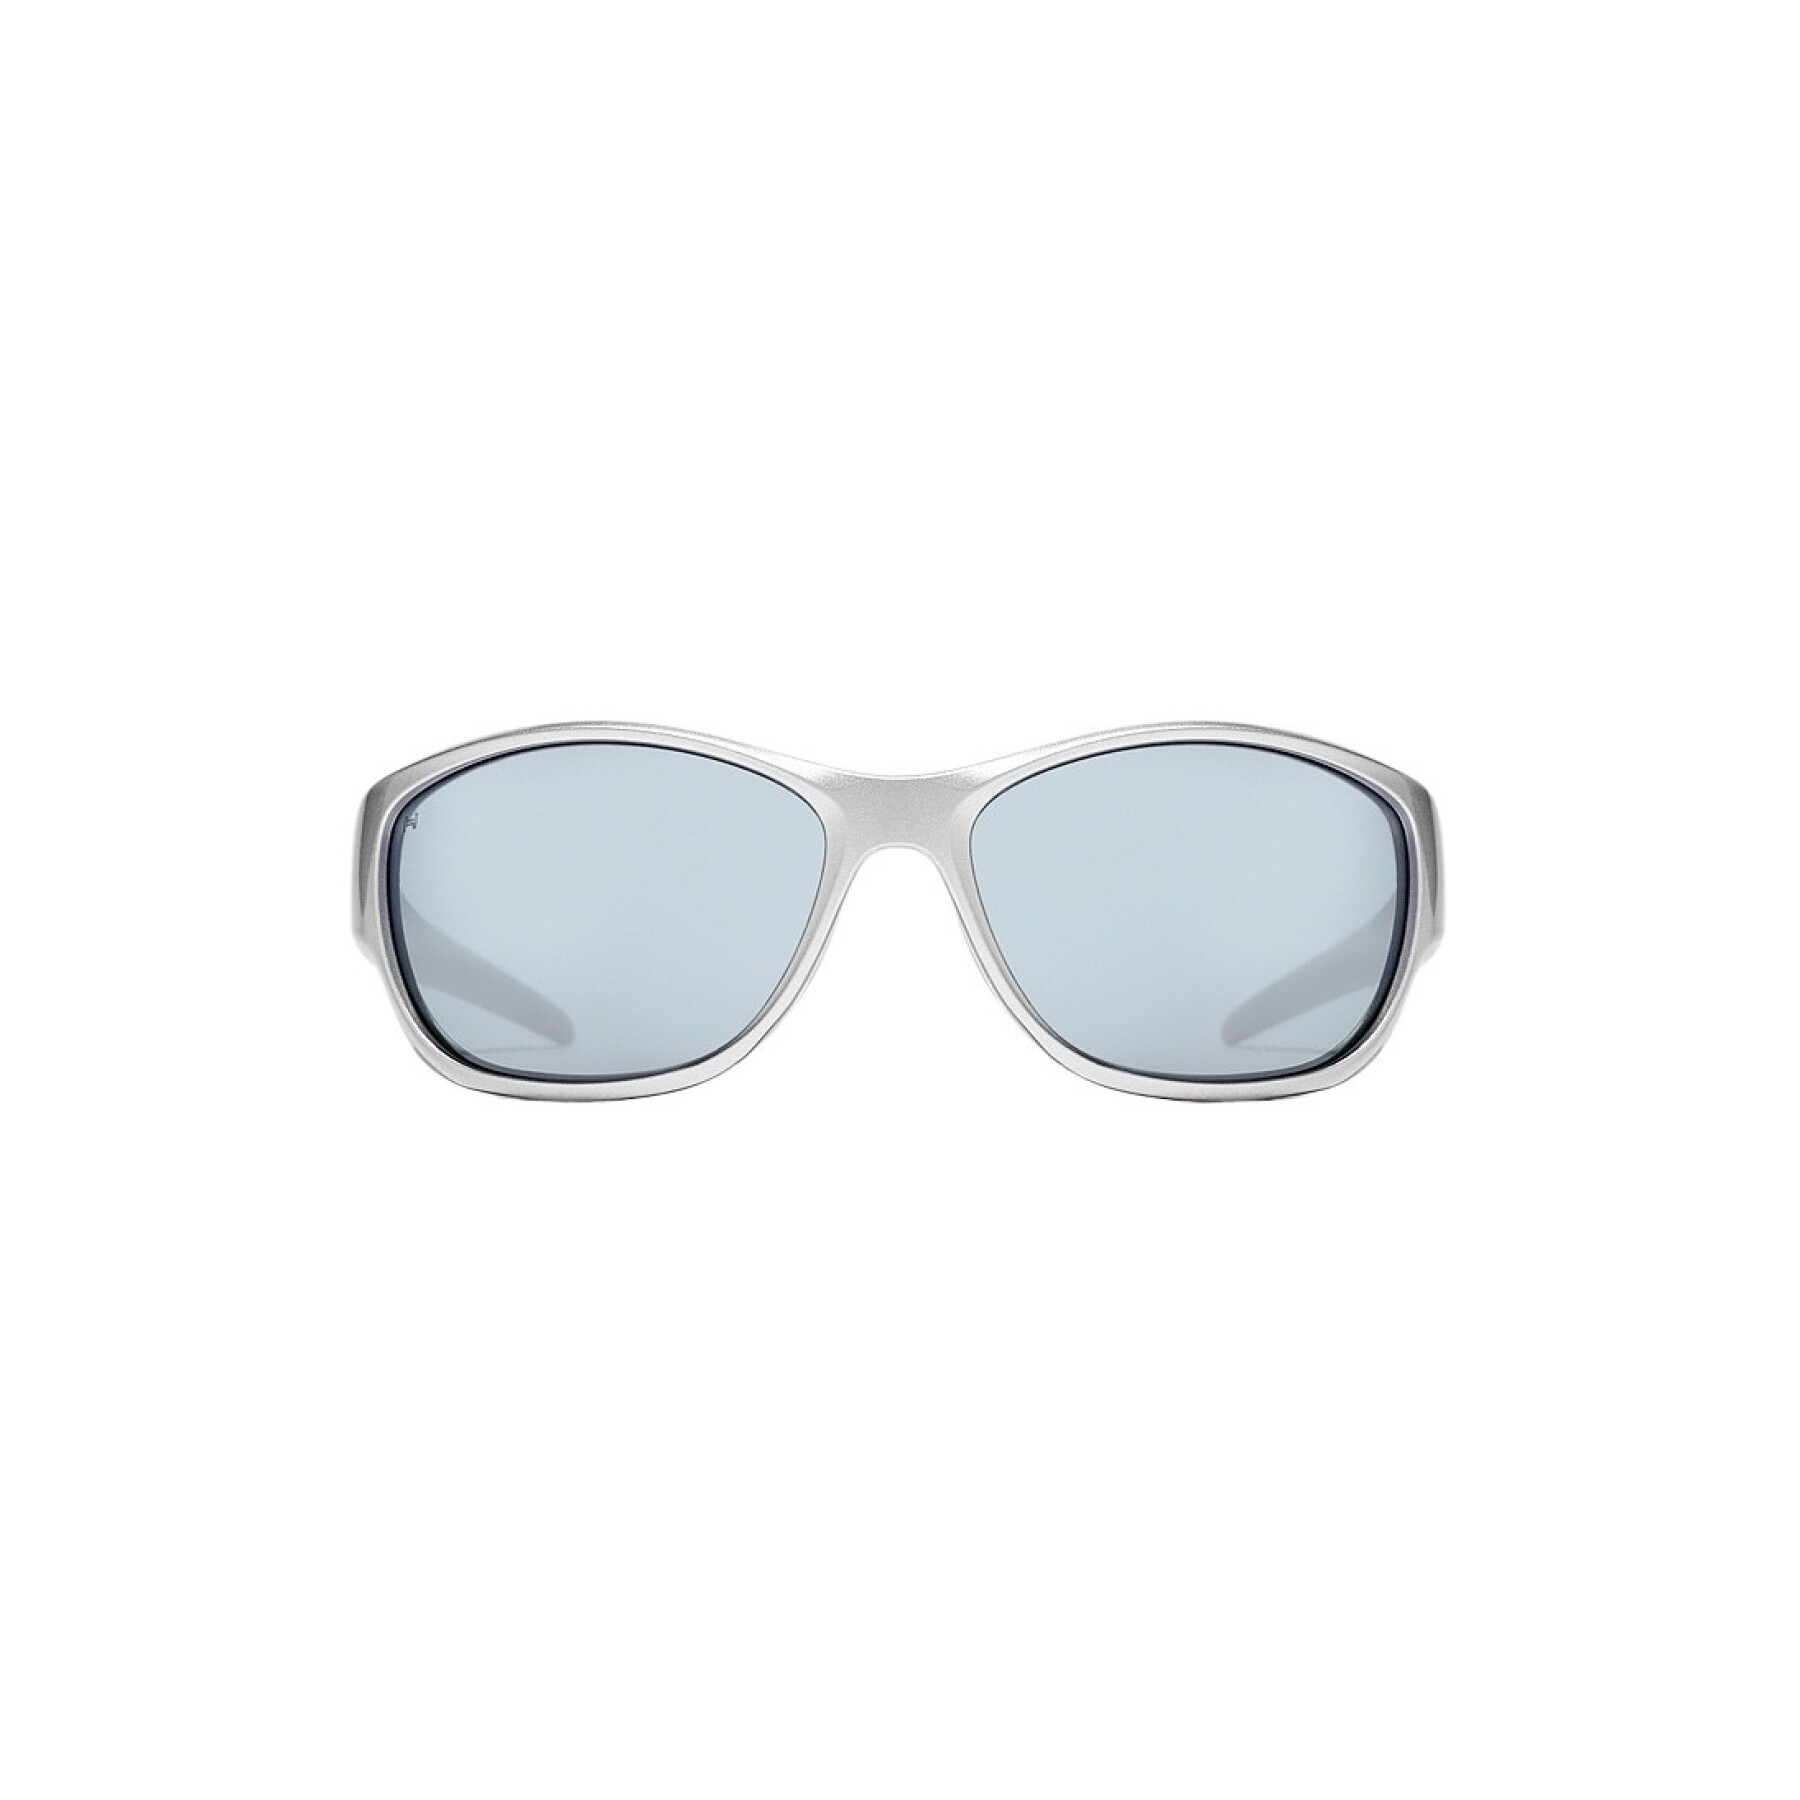 Sonnenbrille Hawkers Polimá - Rave